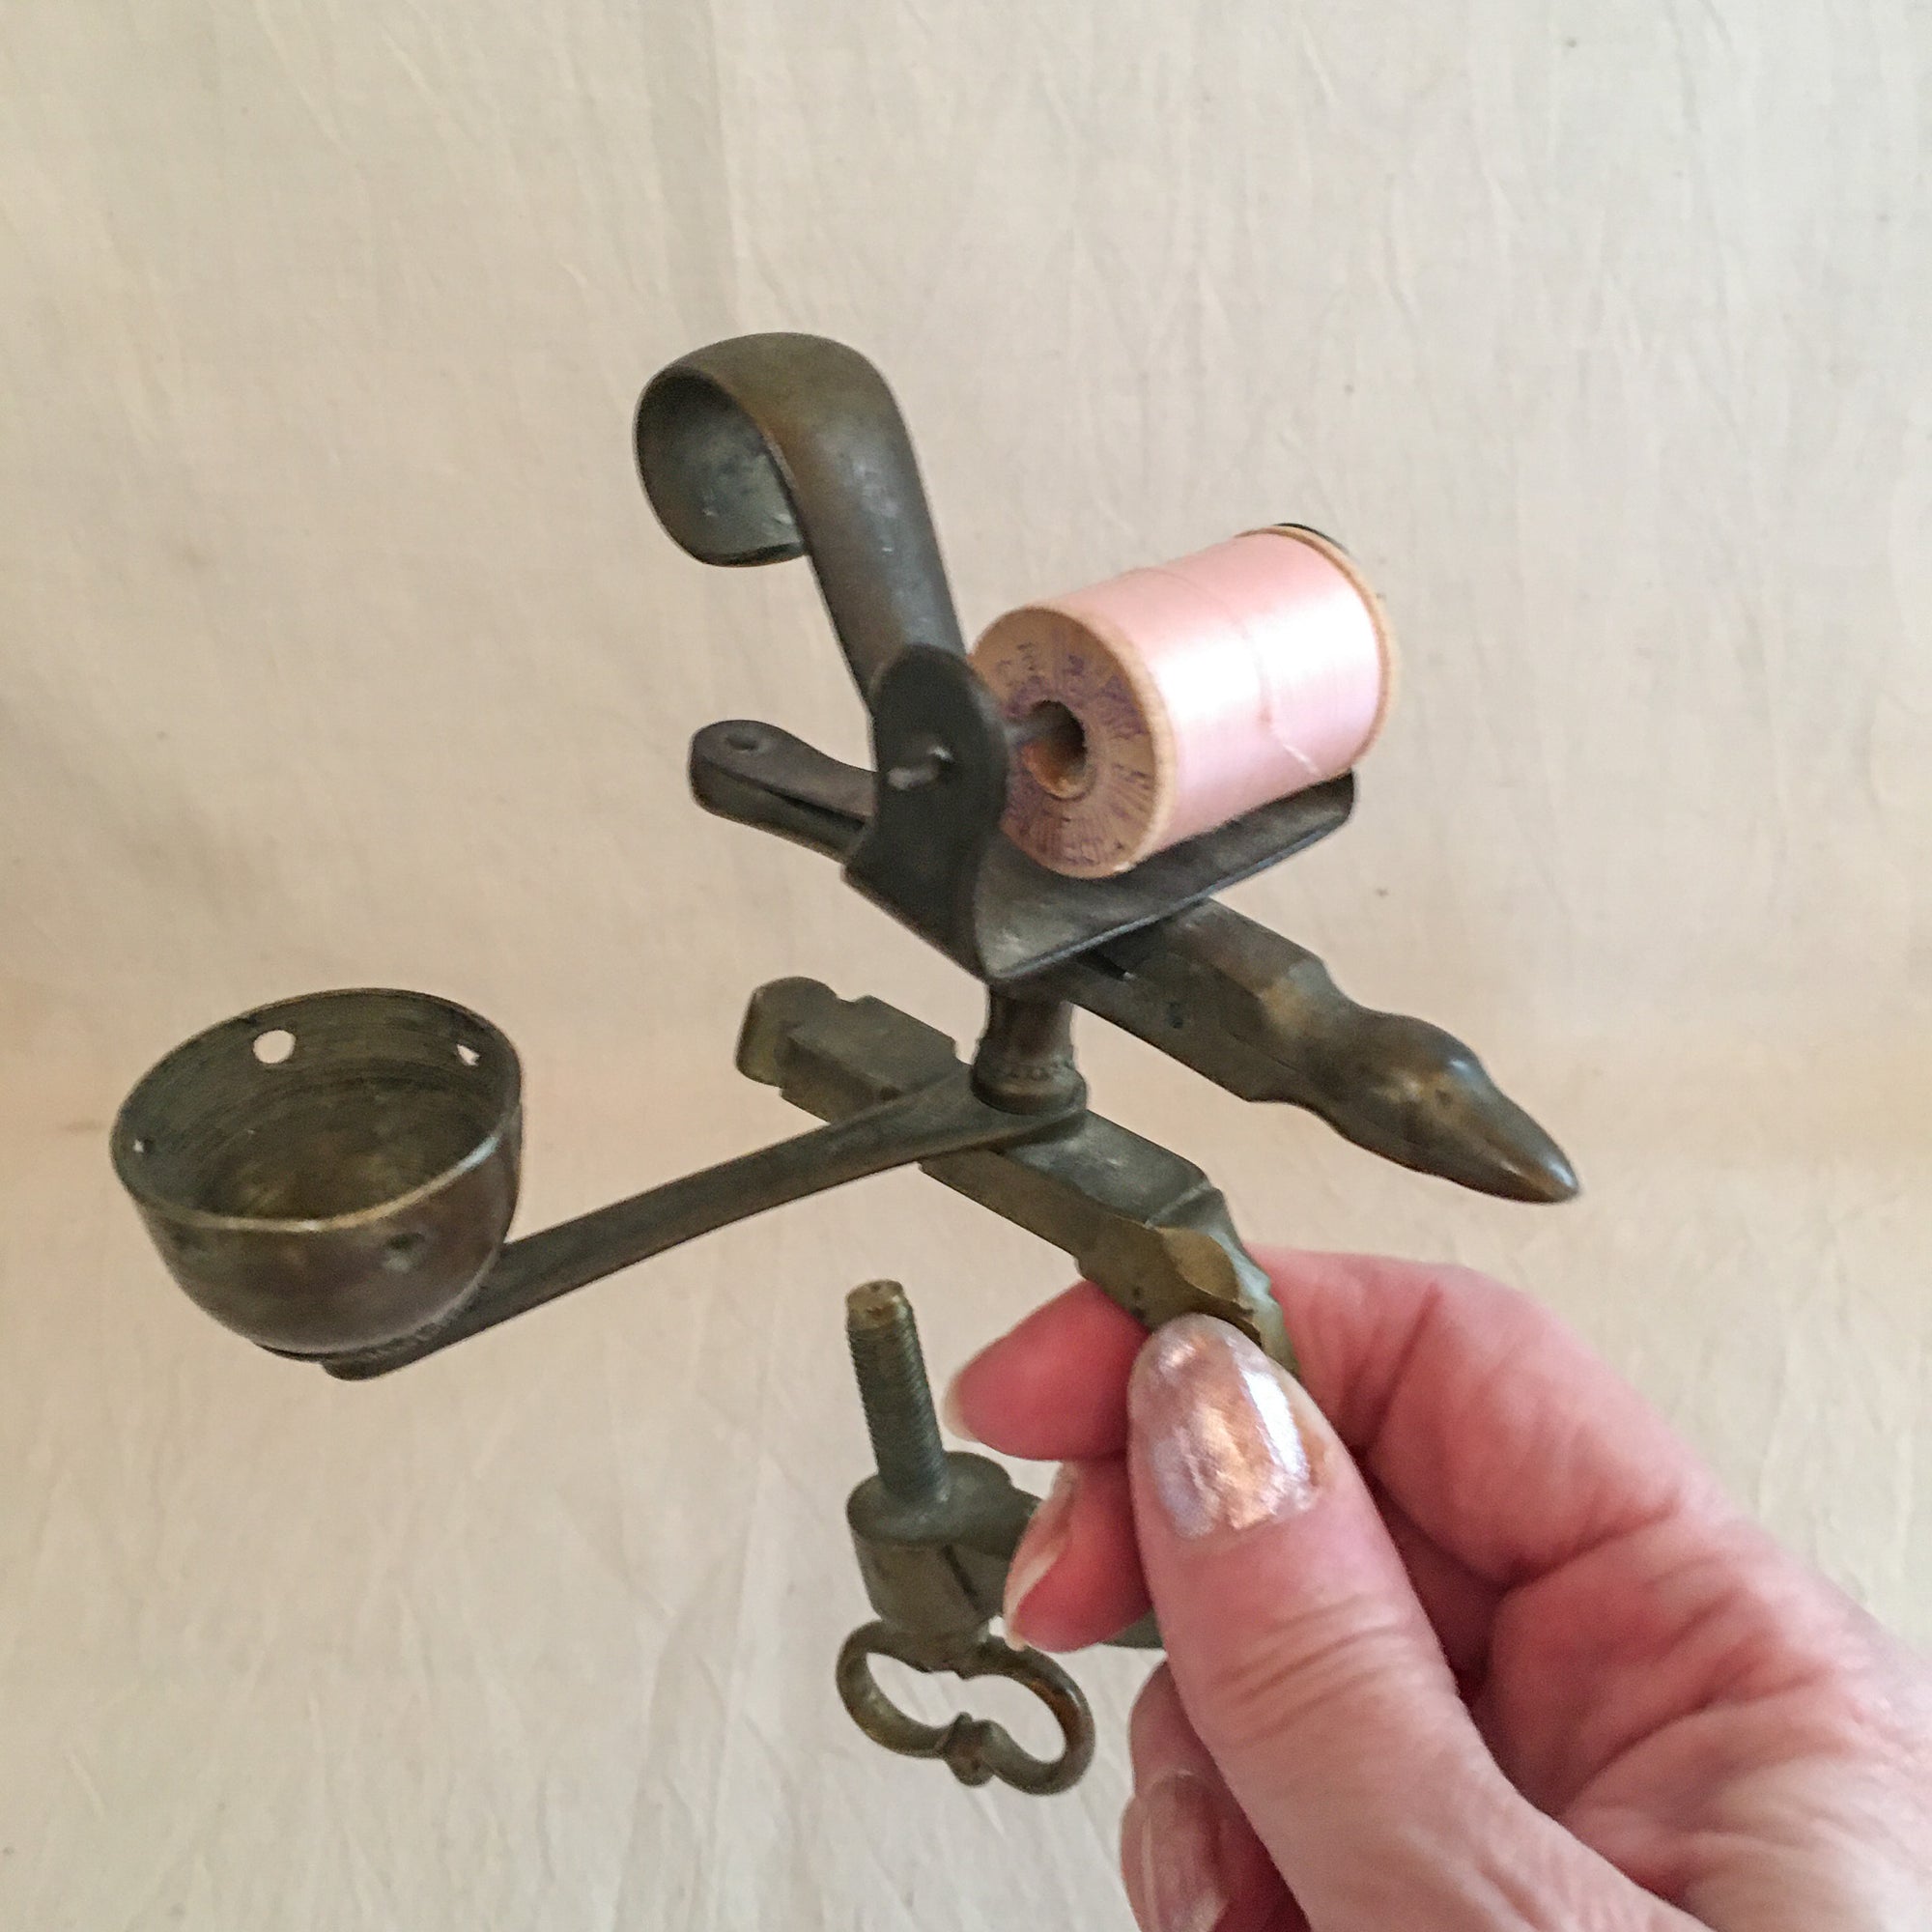 Mid 1800’s, Victorian Era Brass Sewing Bird/Clamp with Spool Holder and Pin Cushion Cup